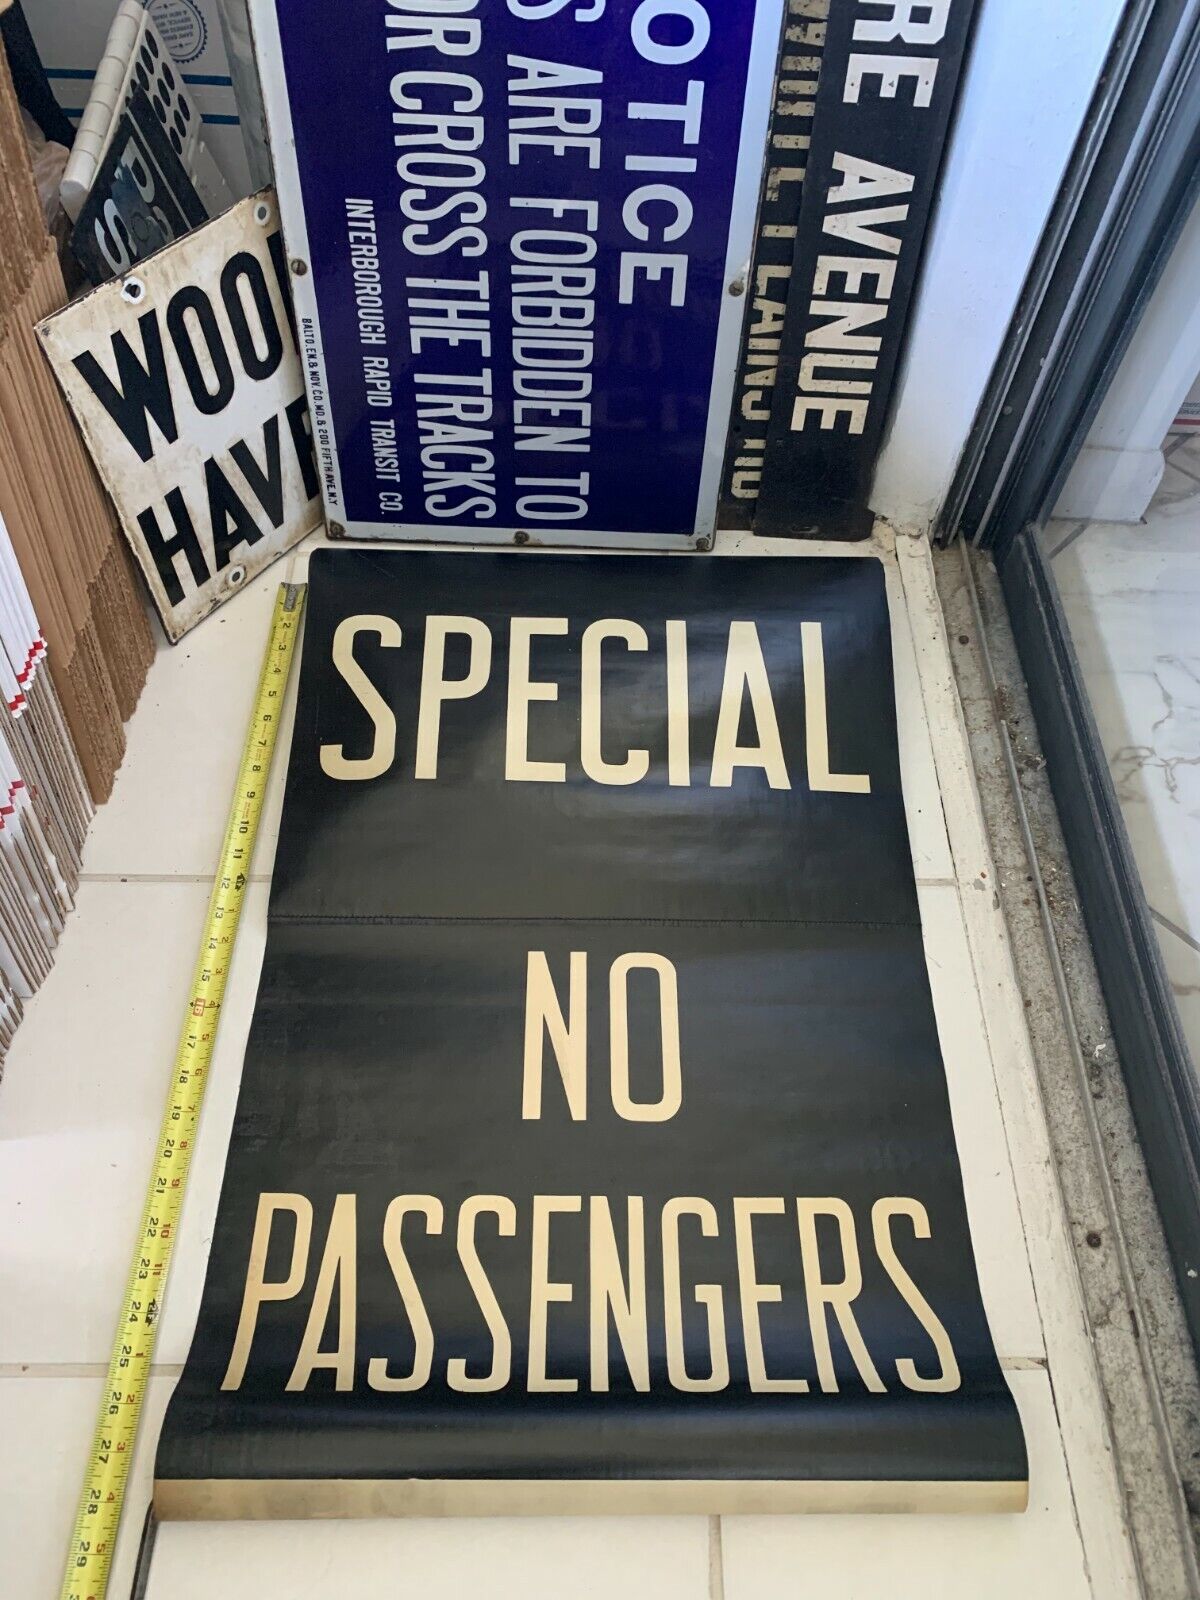 NY NYC 1948 BMT SUBWAY ROLL SIGN SPECIAL NO PASSENGERS R10 DESTINATION HOME ART 